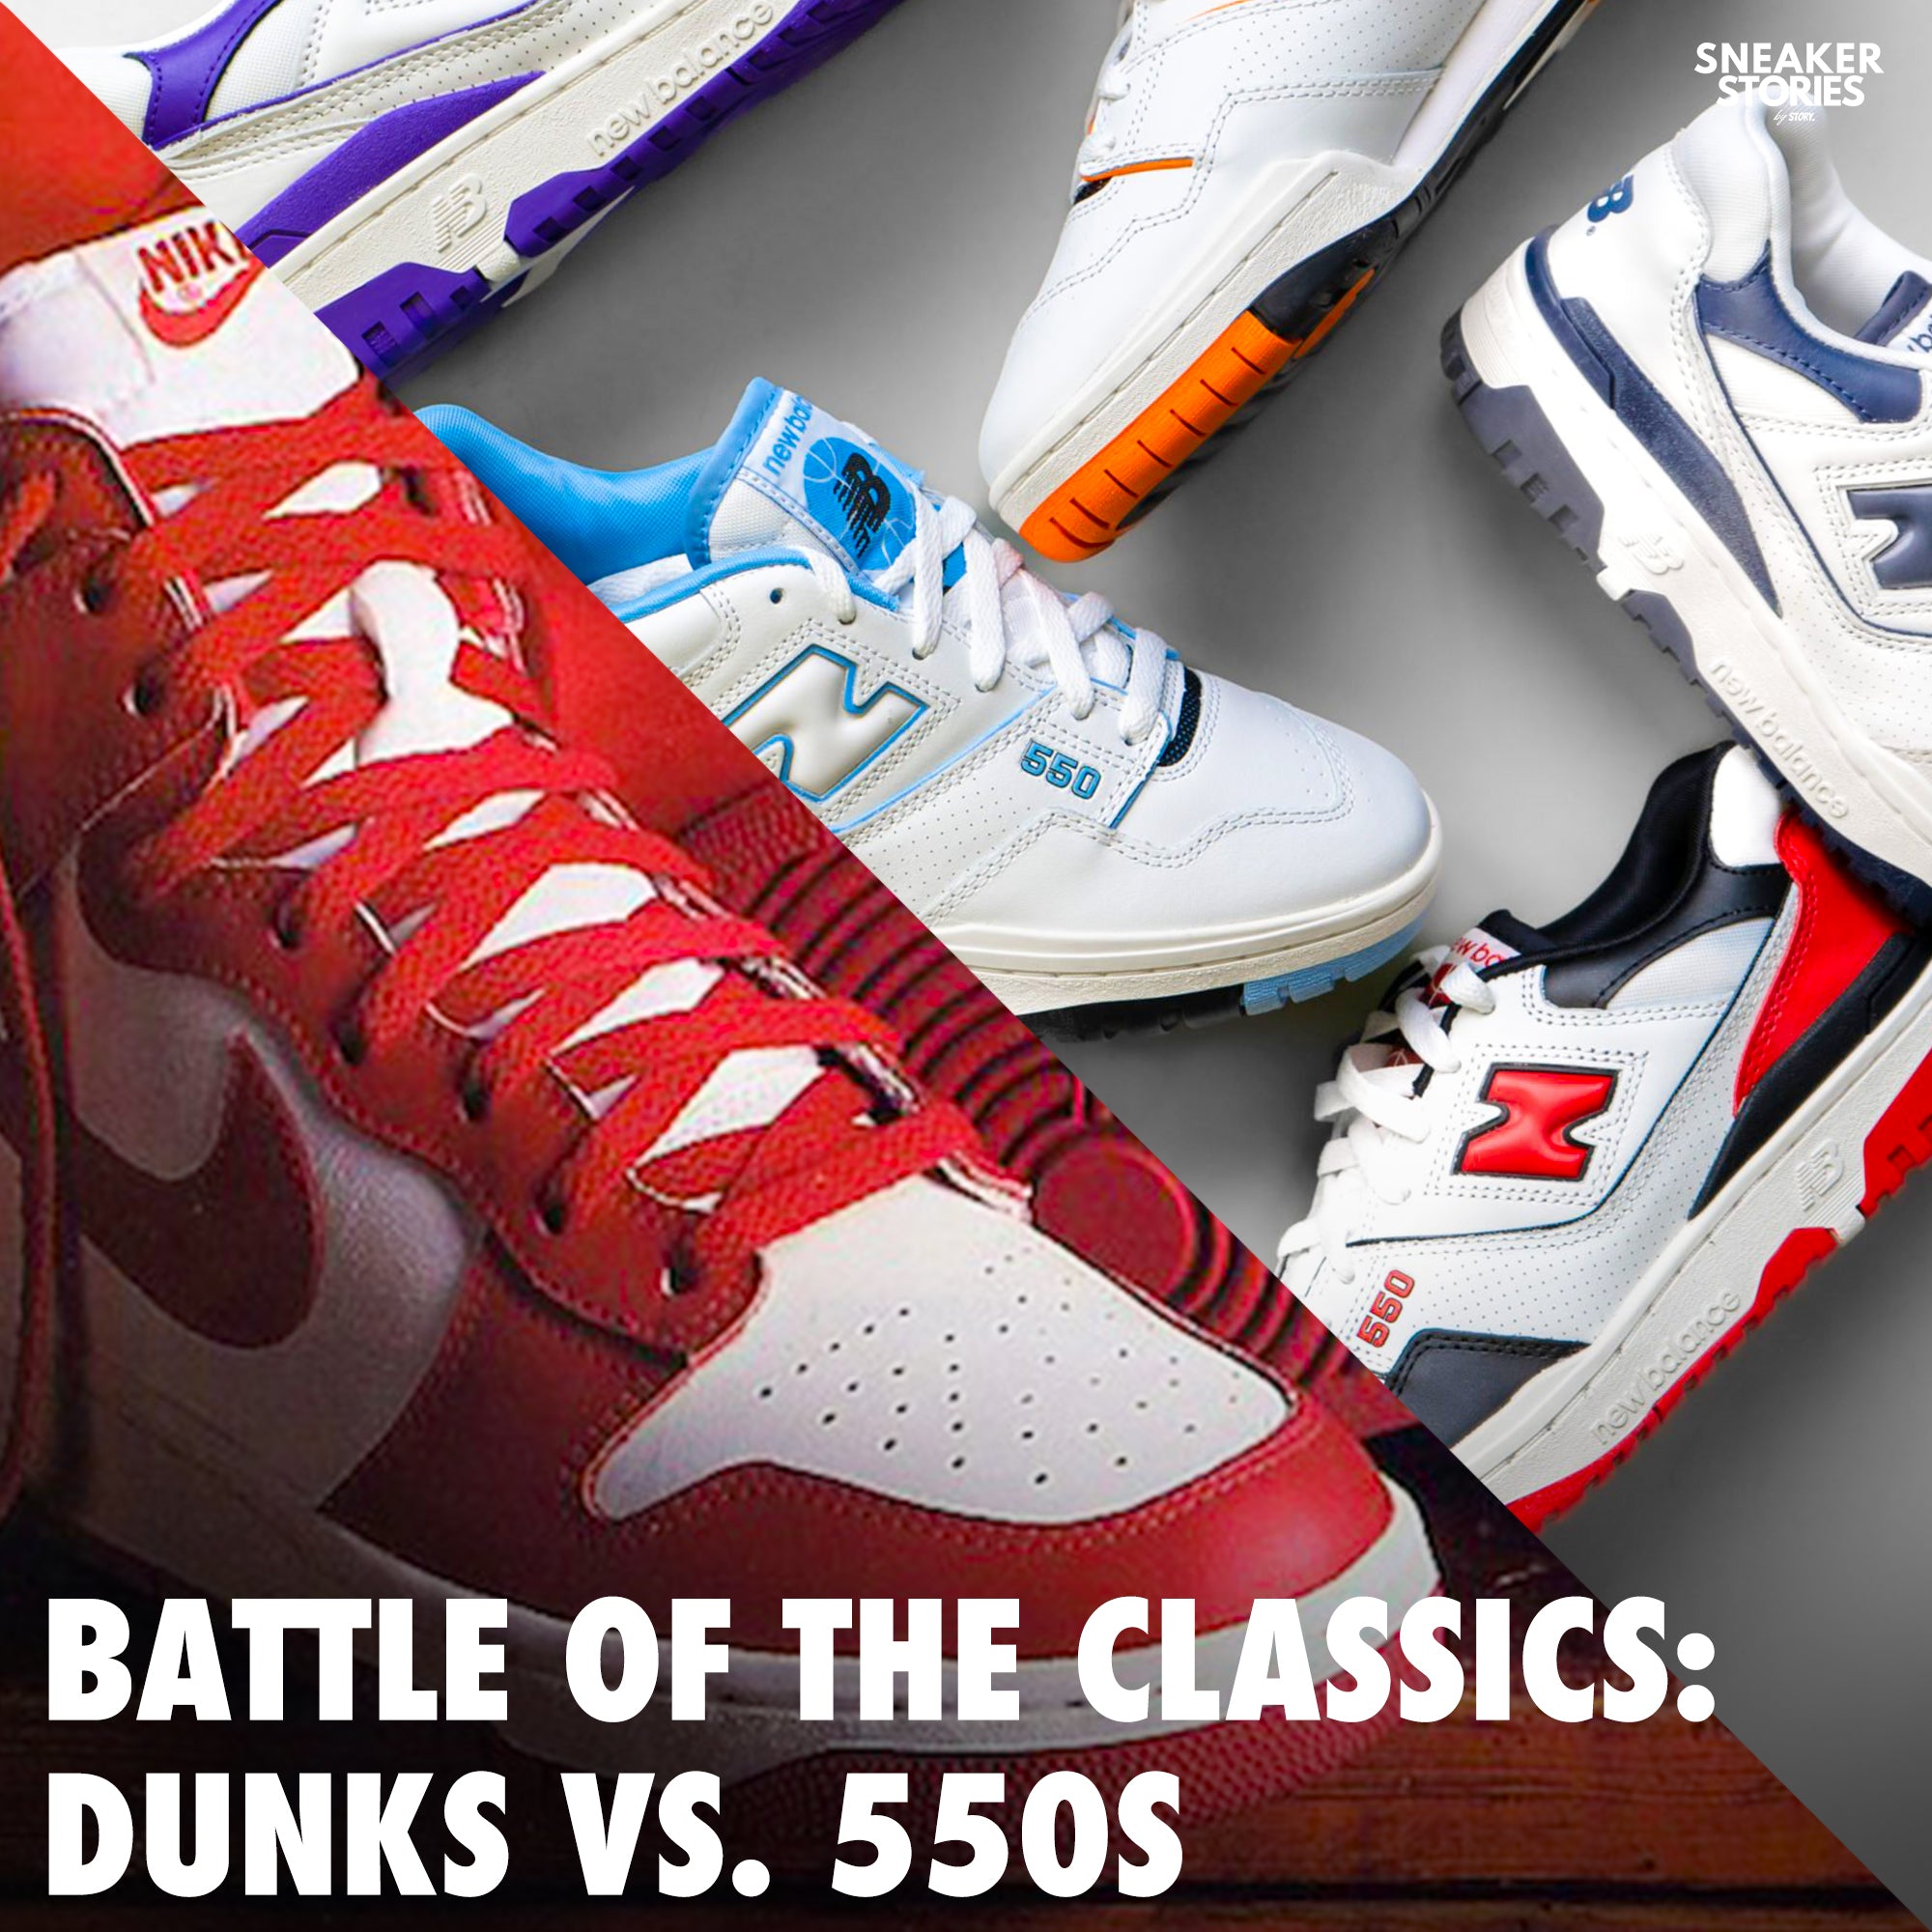 Battle of the Classics: Dunks vs. 550s - Who Will Reign Supreme?